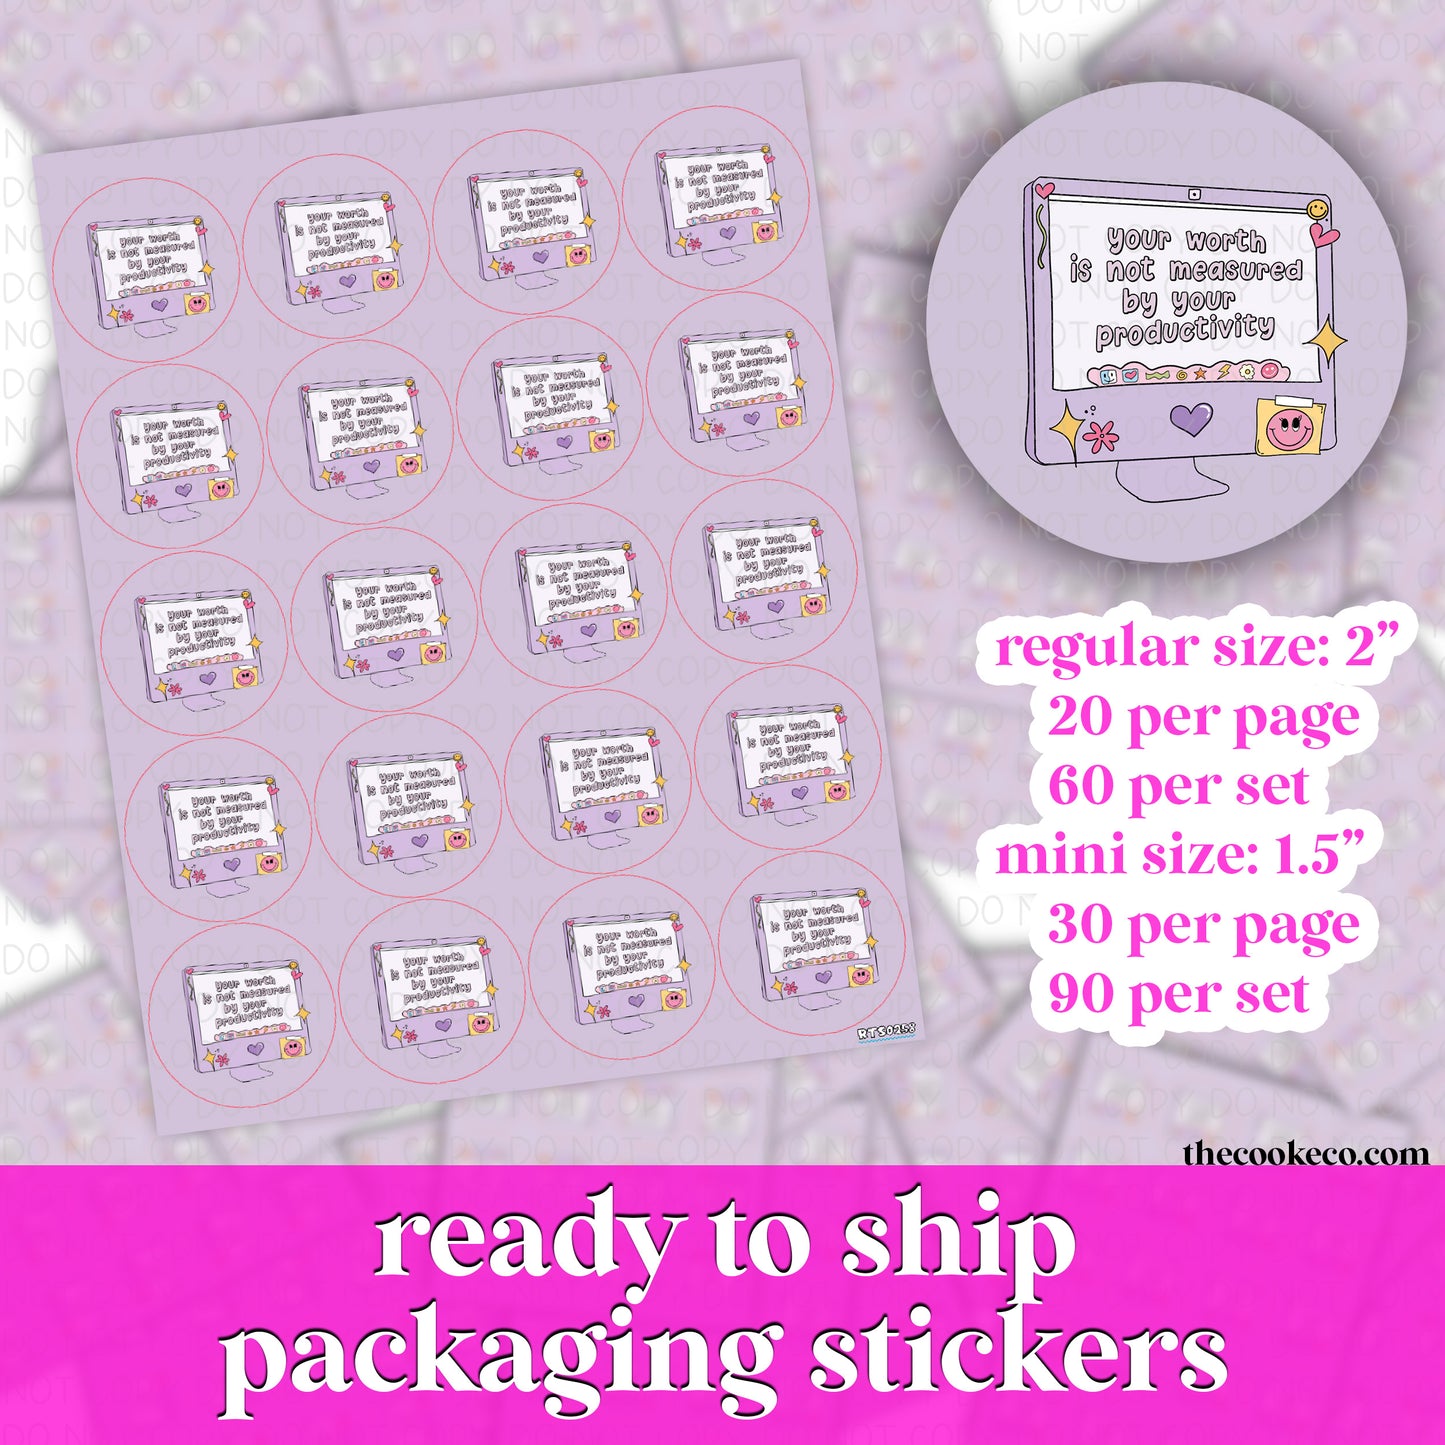 PACKAGING STICKERS | #RTS0248 - YOUR WORTH IS NOT MEASURED BY YOUR PRODUCTIVITY